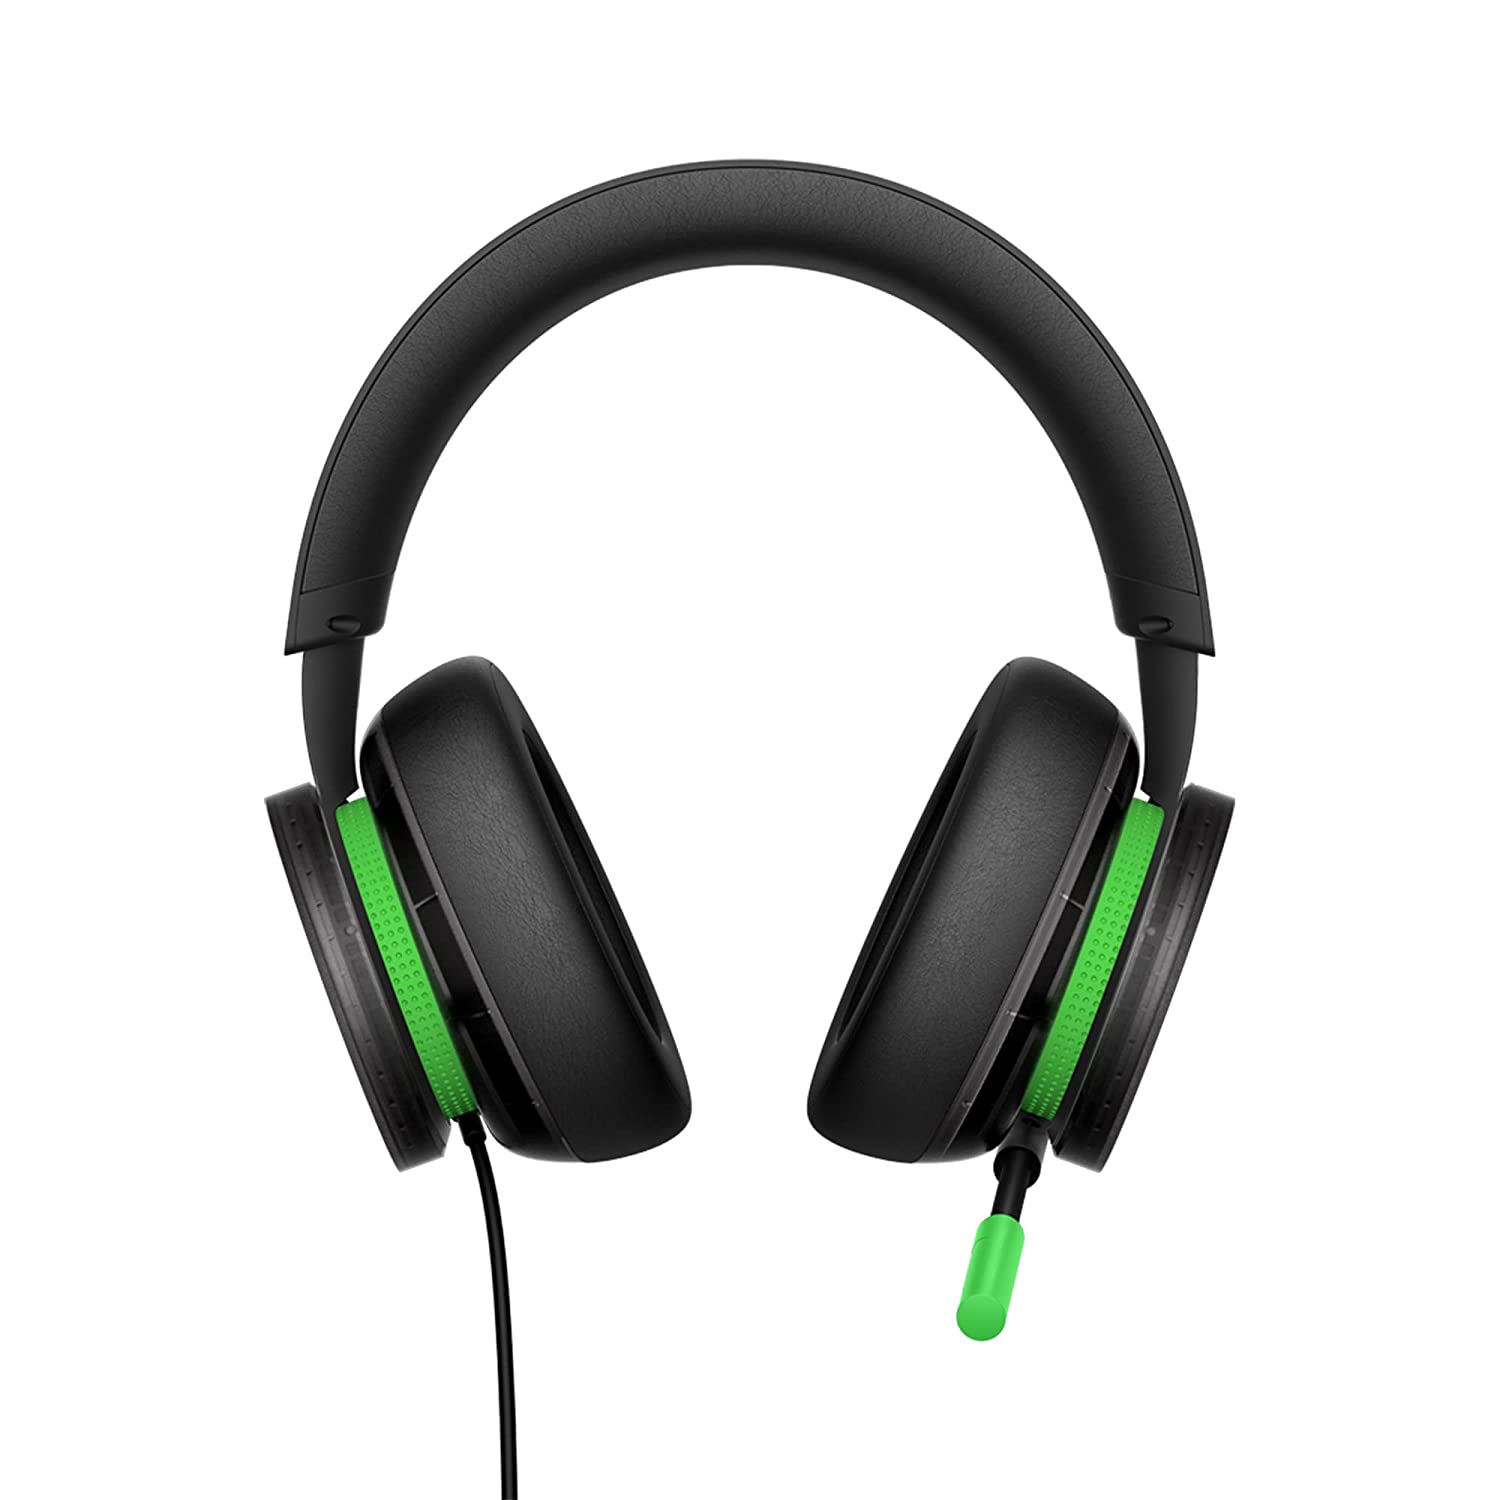 XBOX Stereo Headset - 20th Anniversary Edition